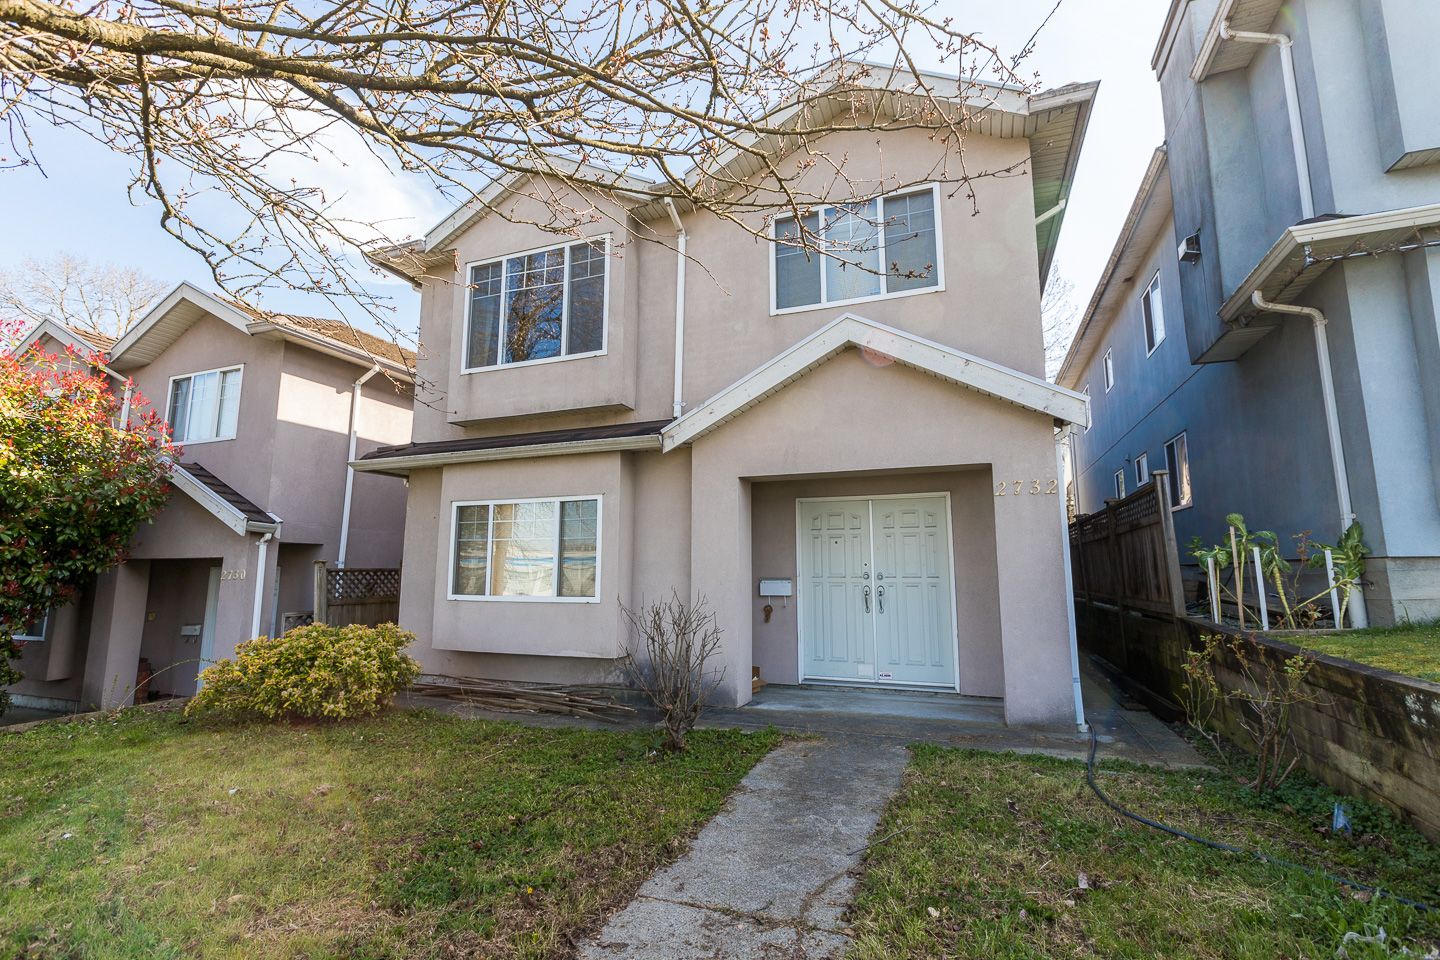 Photo 17: Photos: 2732 BOUNDARY RD in BURNABY: Central BN House for sale (Burnaby North)  : MLS®# R2559492